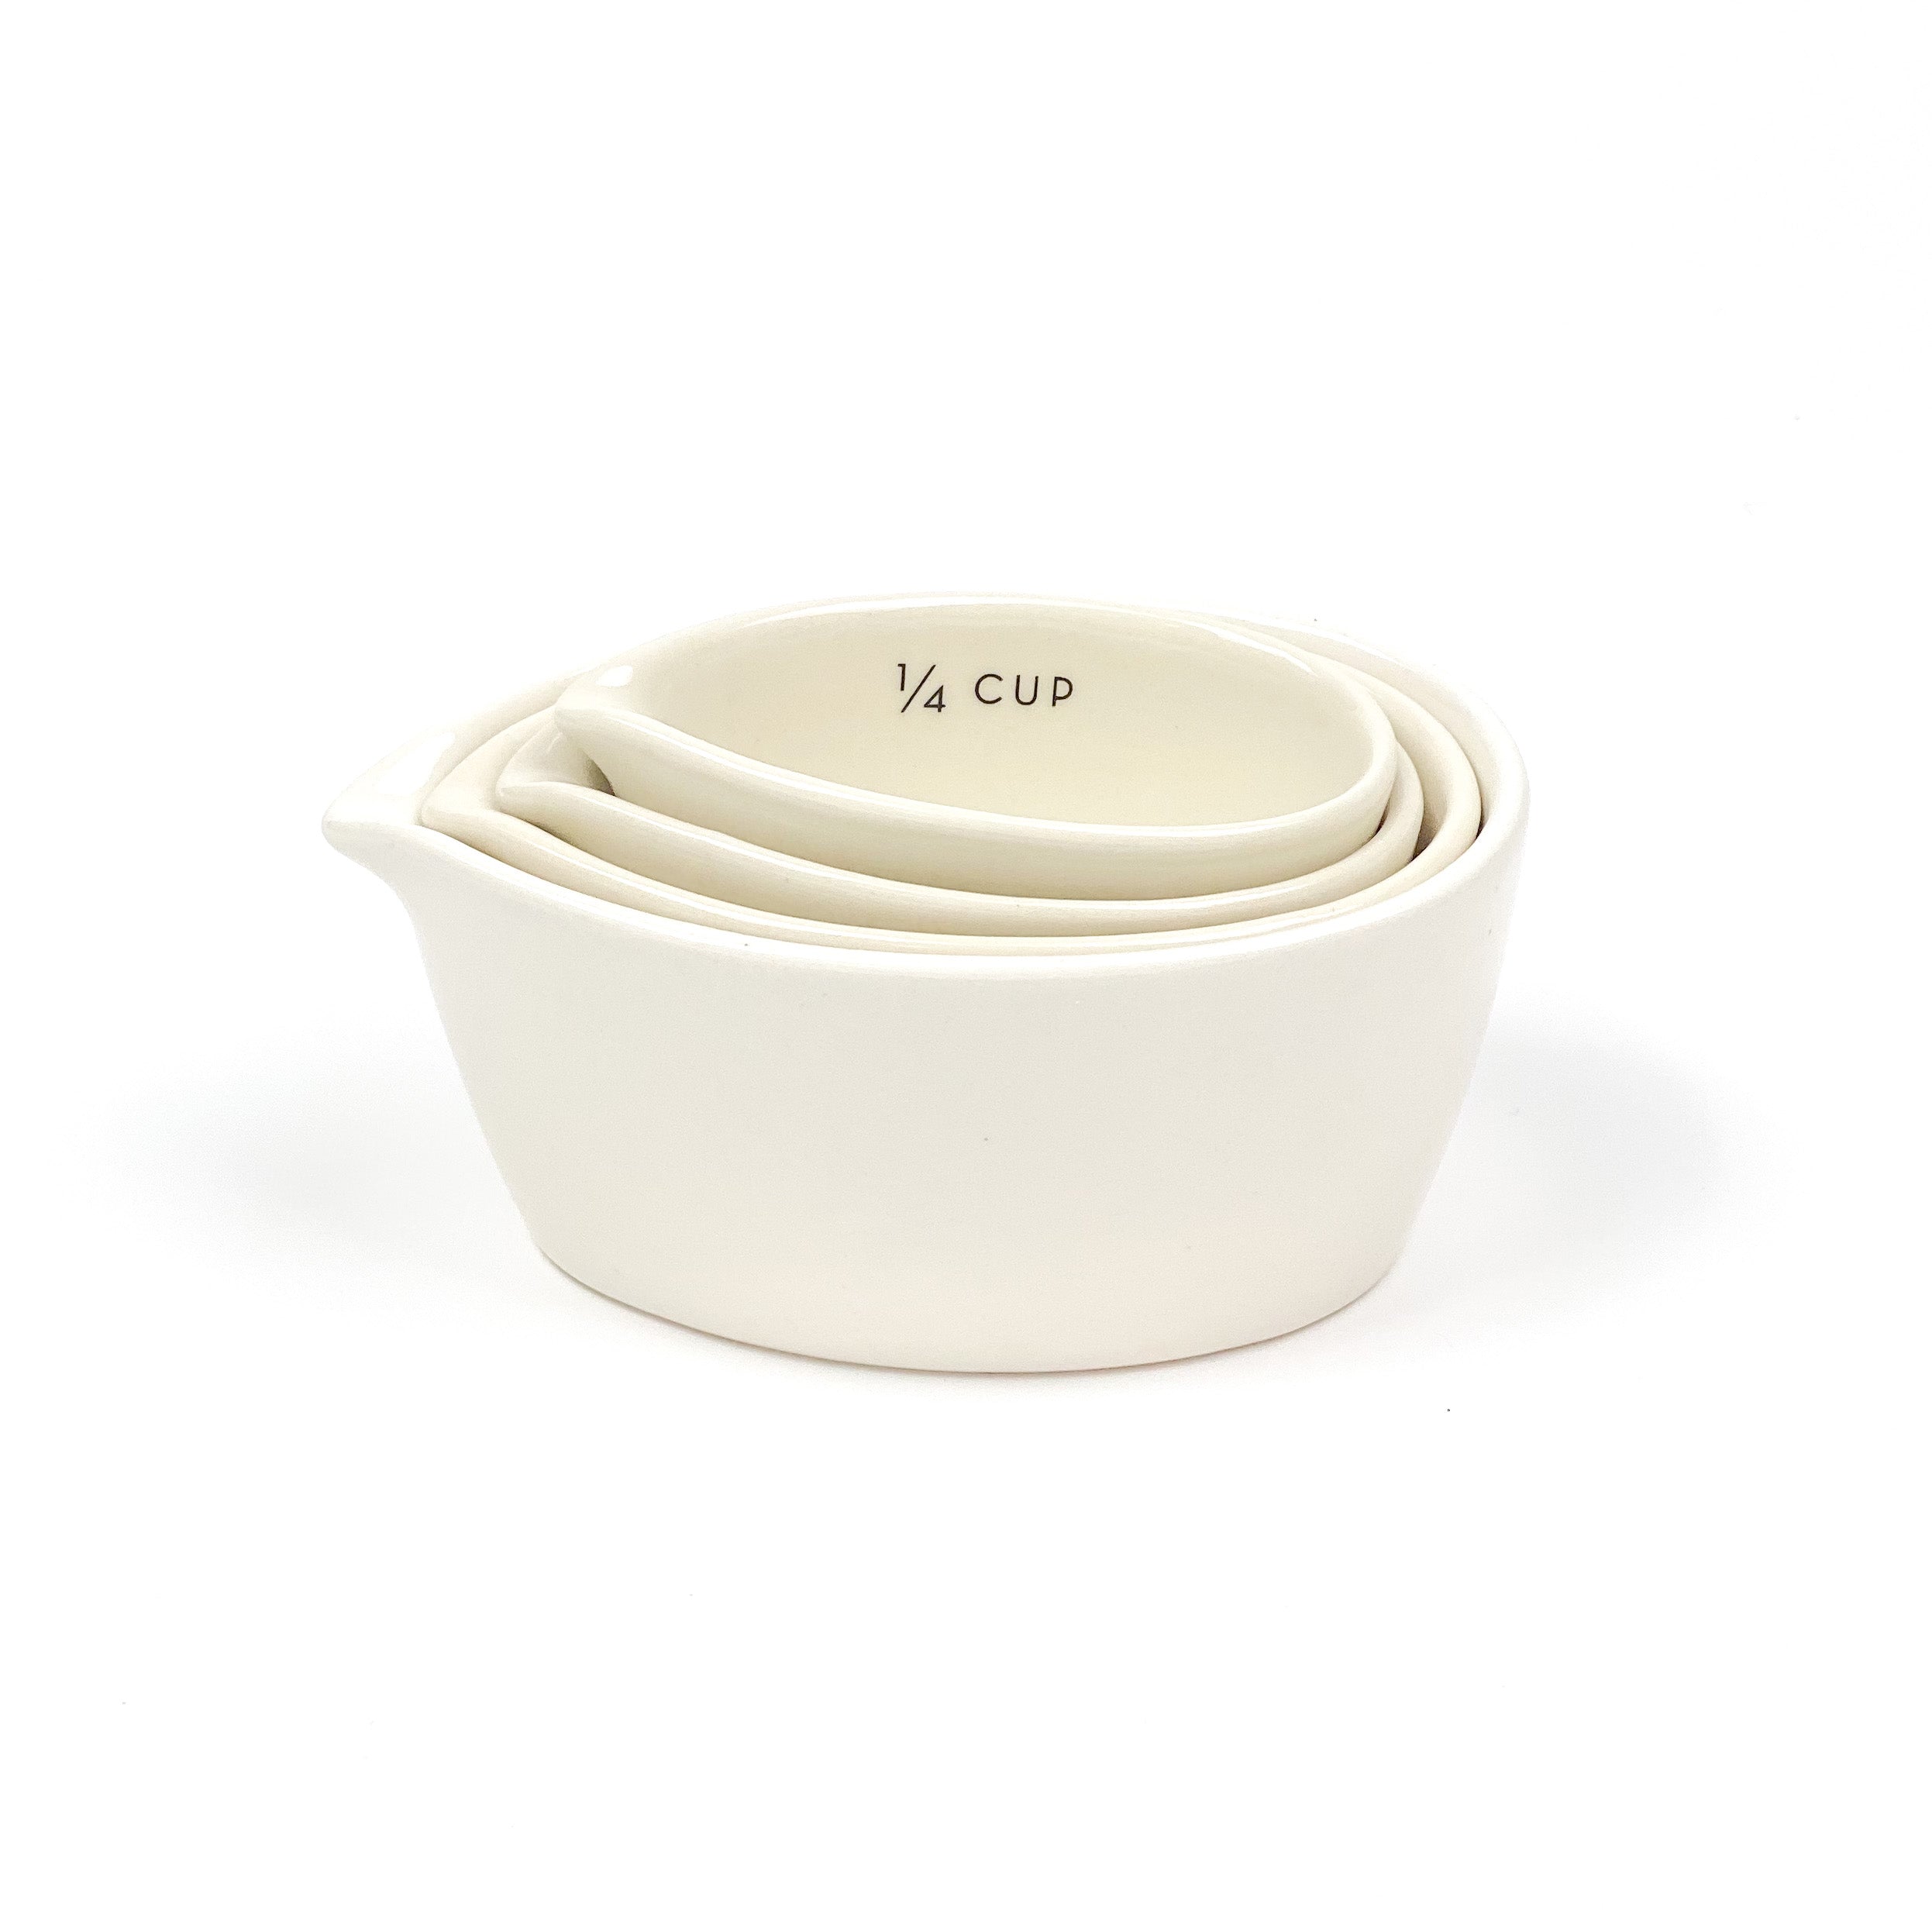 Simply Gourmet Stainless Steel Nesting Measuring Cups